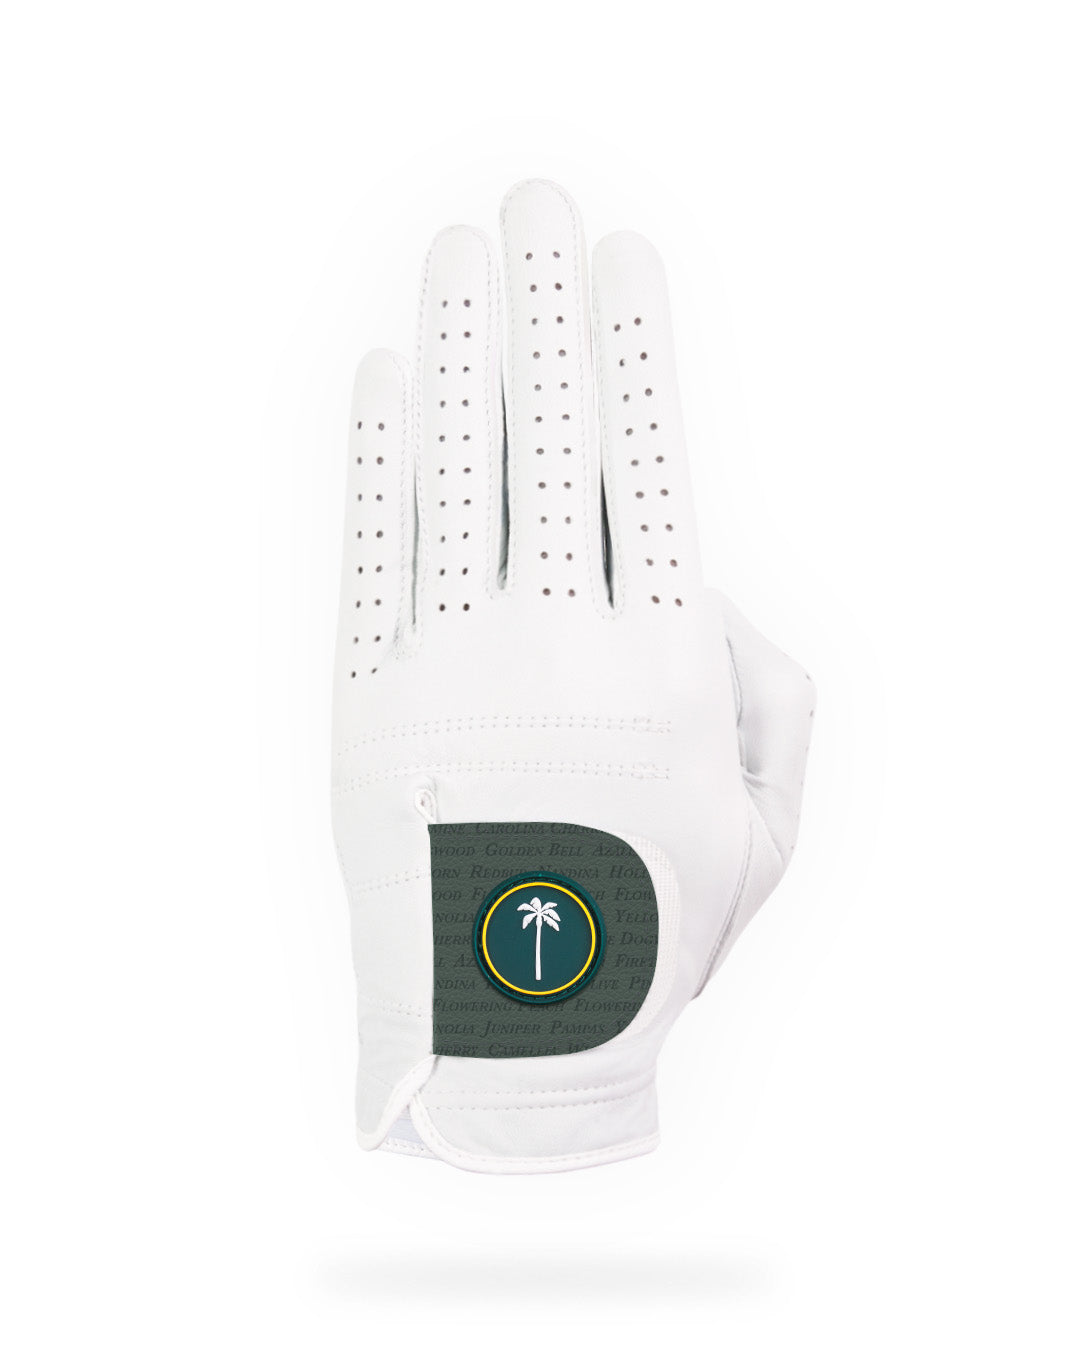 Men's Tradition Glove - Palm Golf Co.